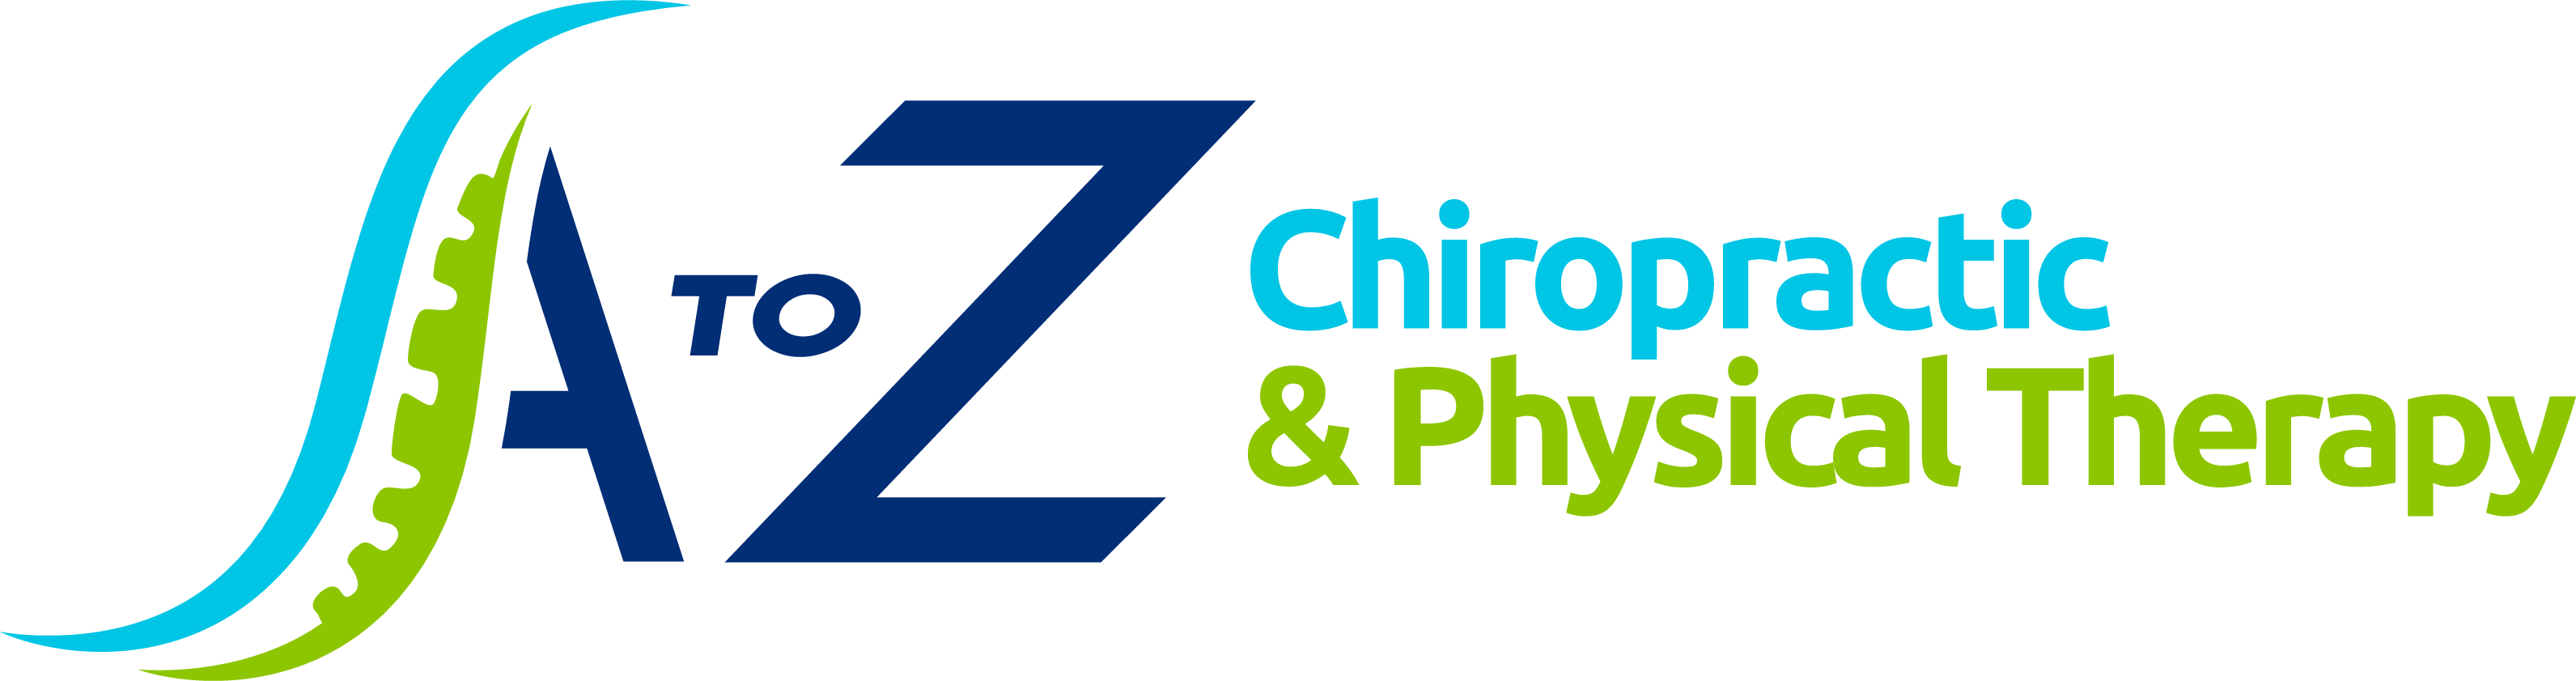 A to Z Chiropractic & Physical Therapy